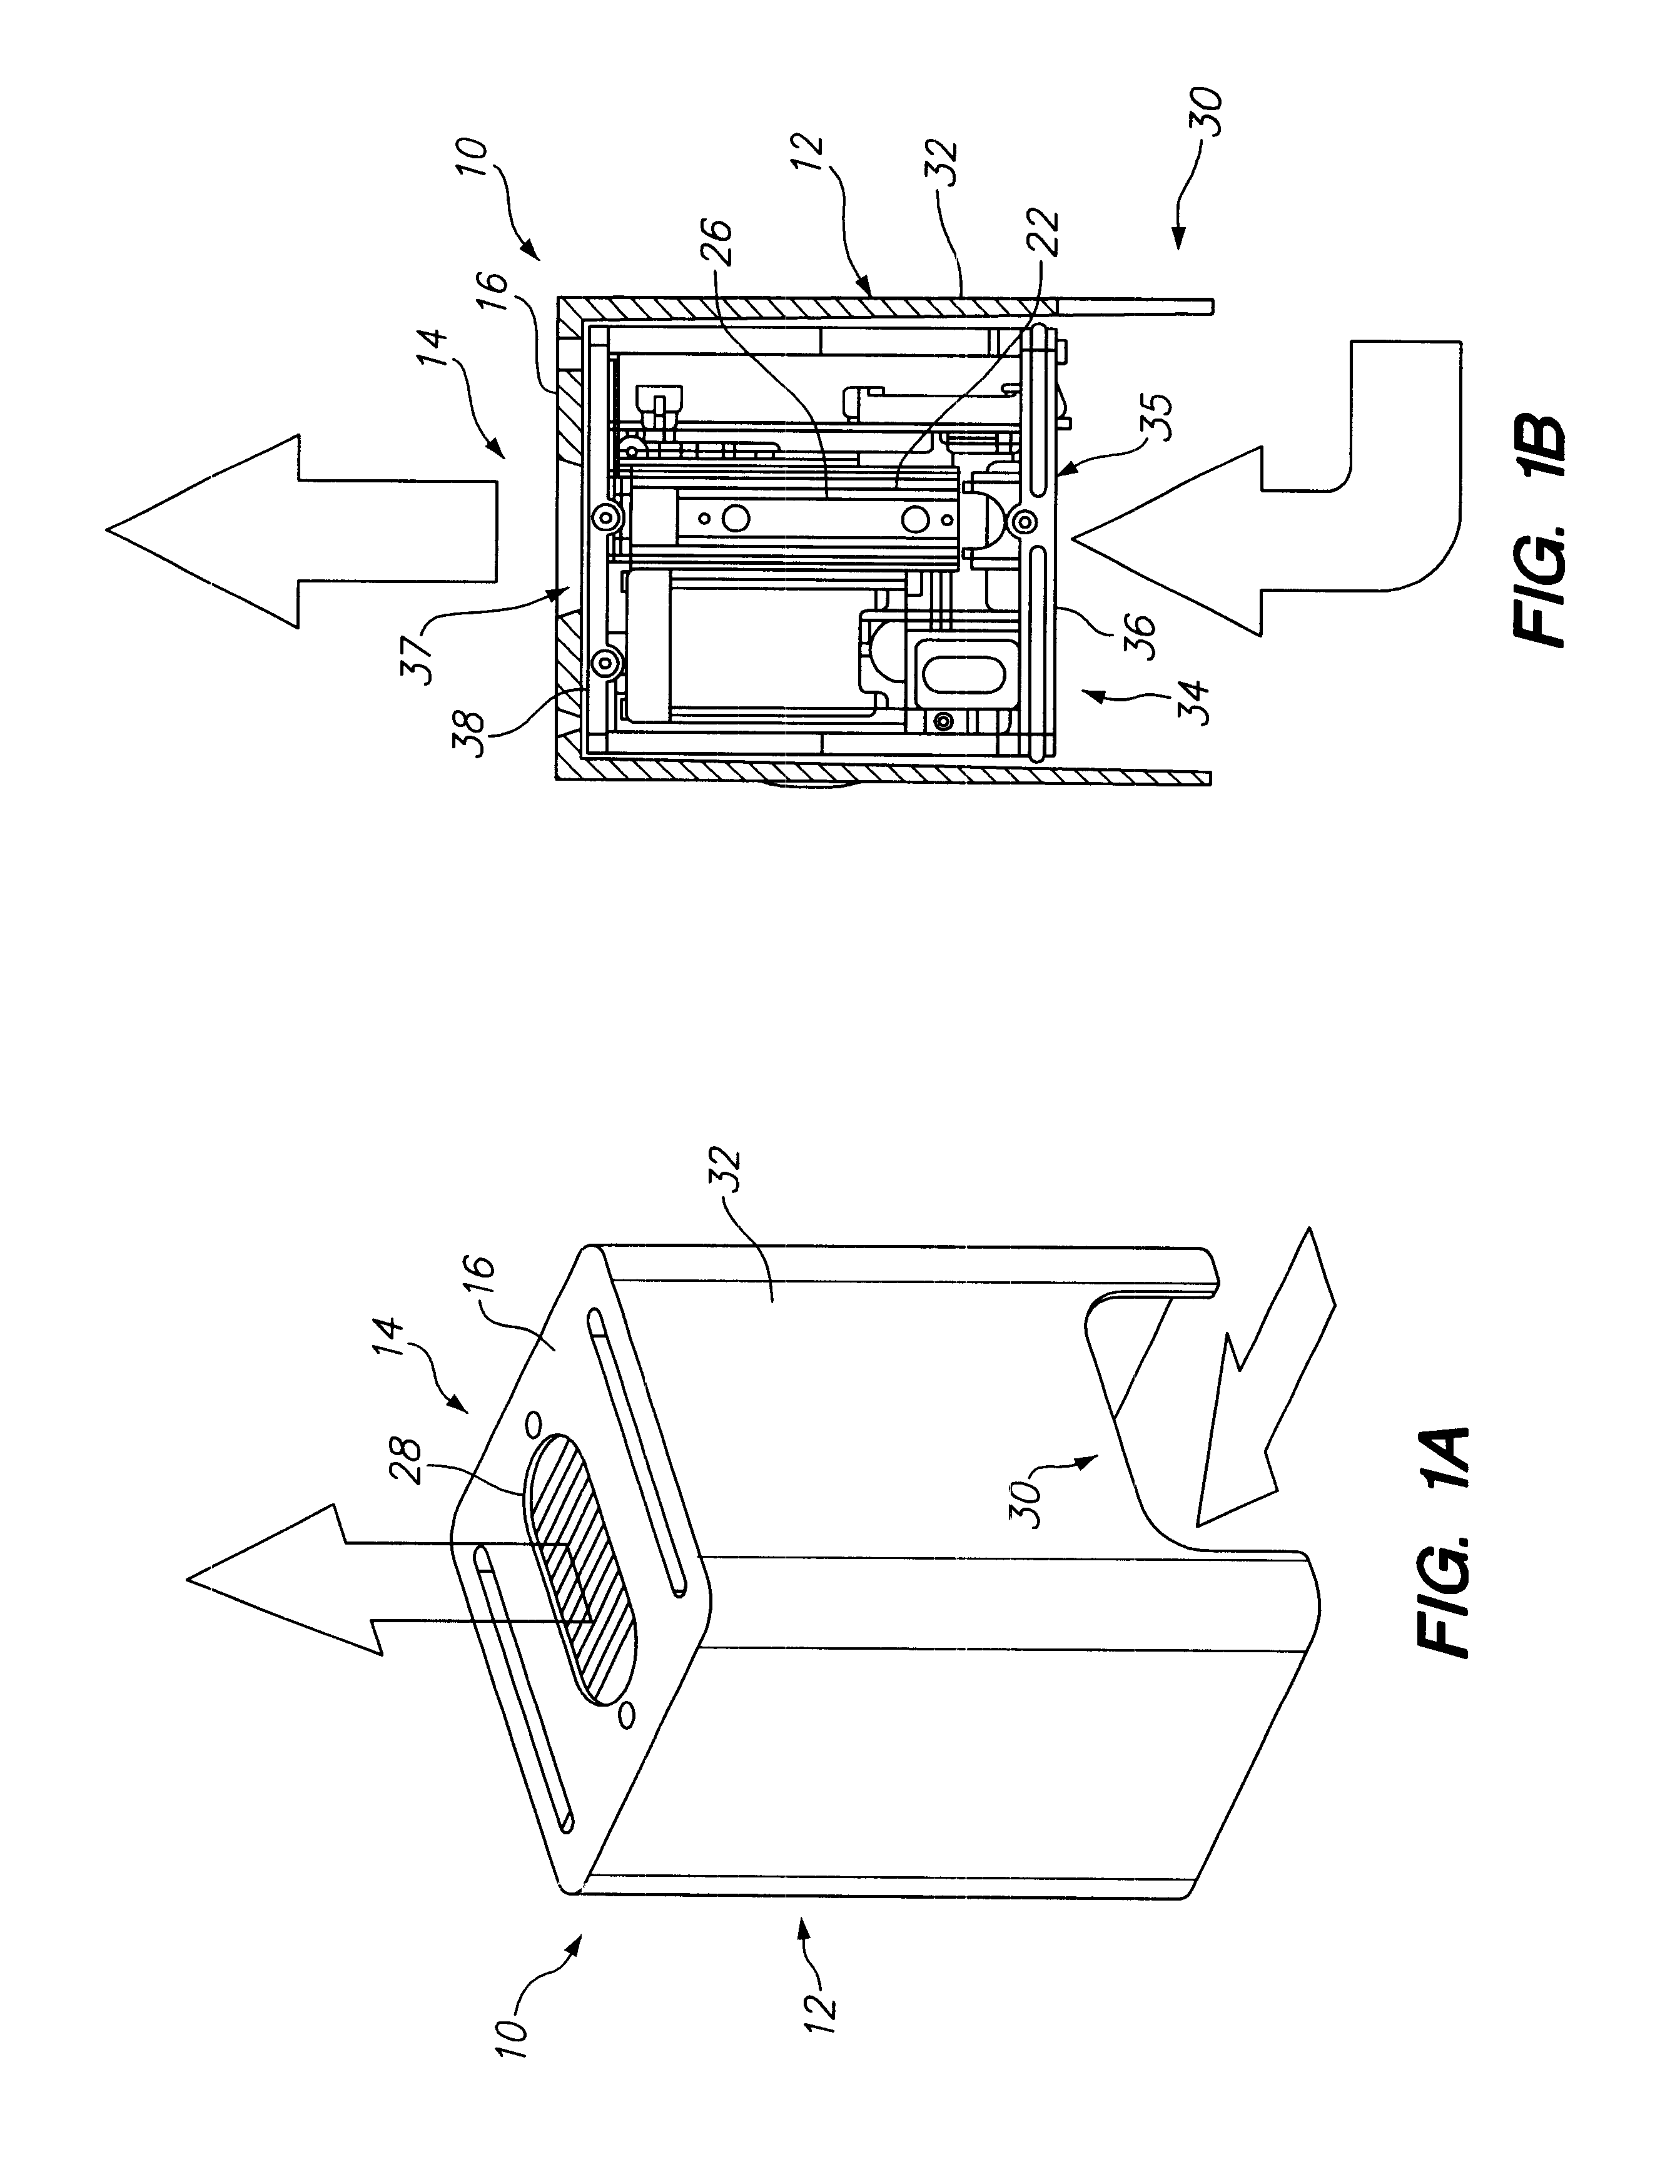 Thermal chimney for a computer